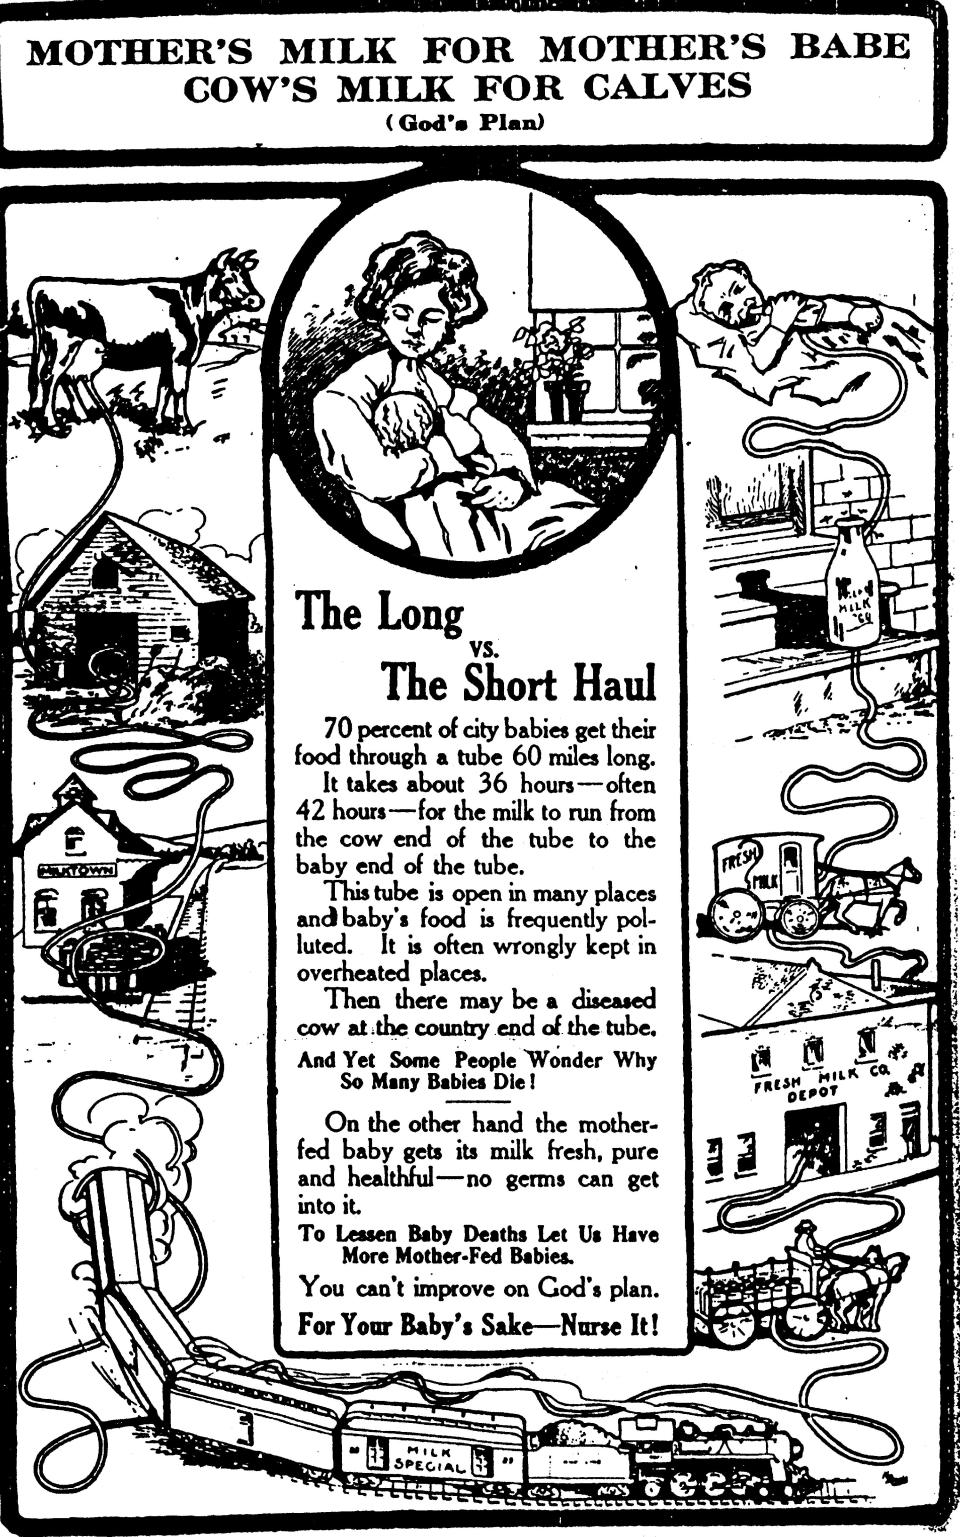 This poster was used in breastfeeding campaigns, and public health workers plastered it all over urban neighborhoods throughout the U.S. in the early 20th century. It illustrates the arduous journey cow's milk takes to reach an infant in the city. (Image: Bulletin Chicago School of Sanitary Instruction, June 3, 1911)